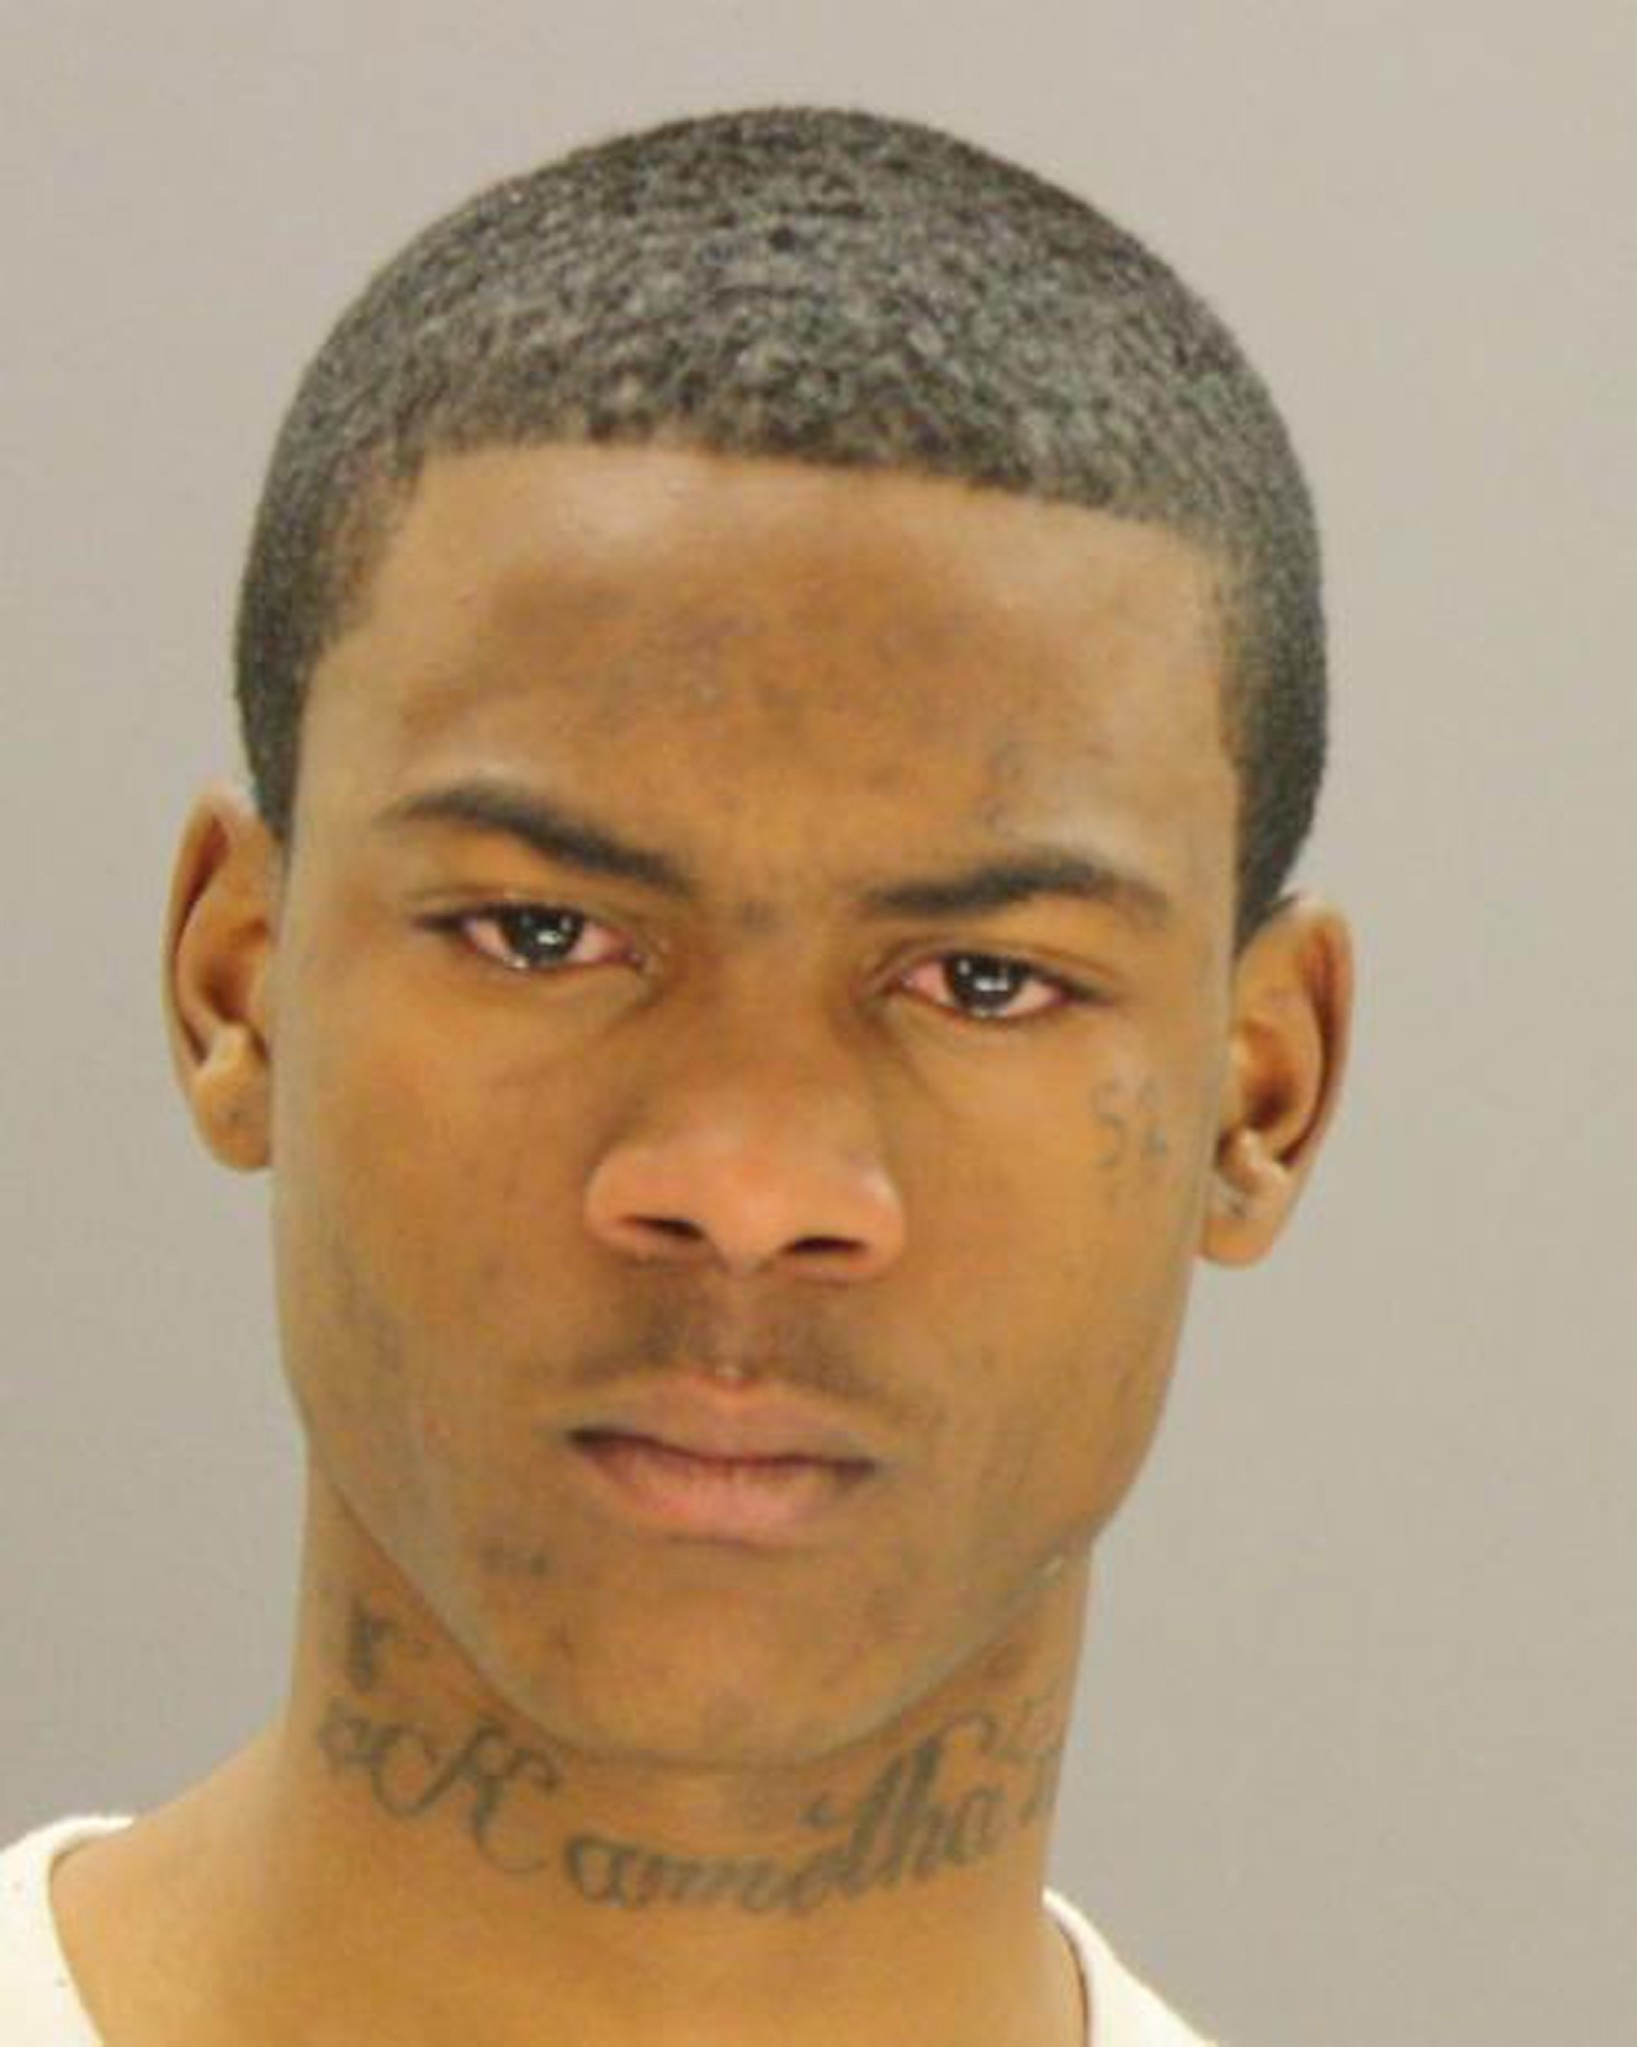 Nykerion Nealon is seen in an undated photo released by the Dallas County Sheriff's Department in Dallas, Texas. (REUTERS Photo)